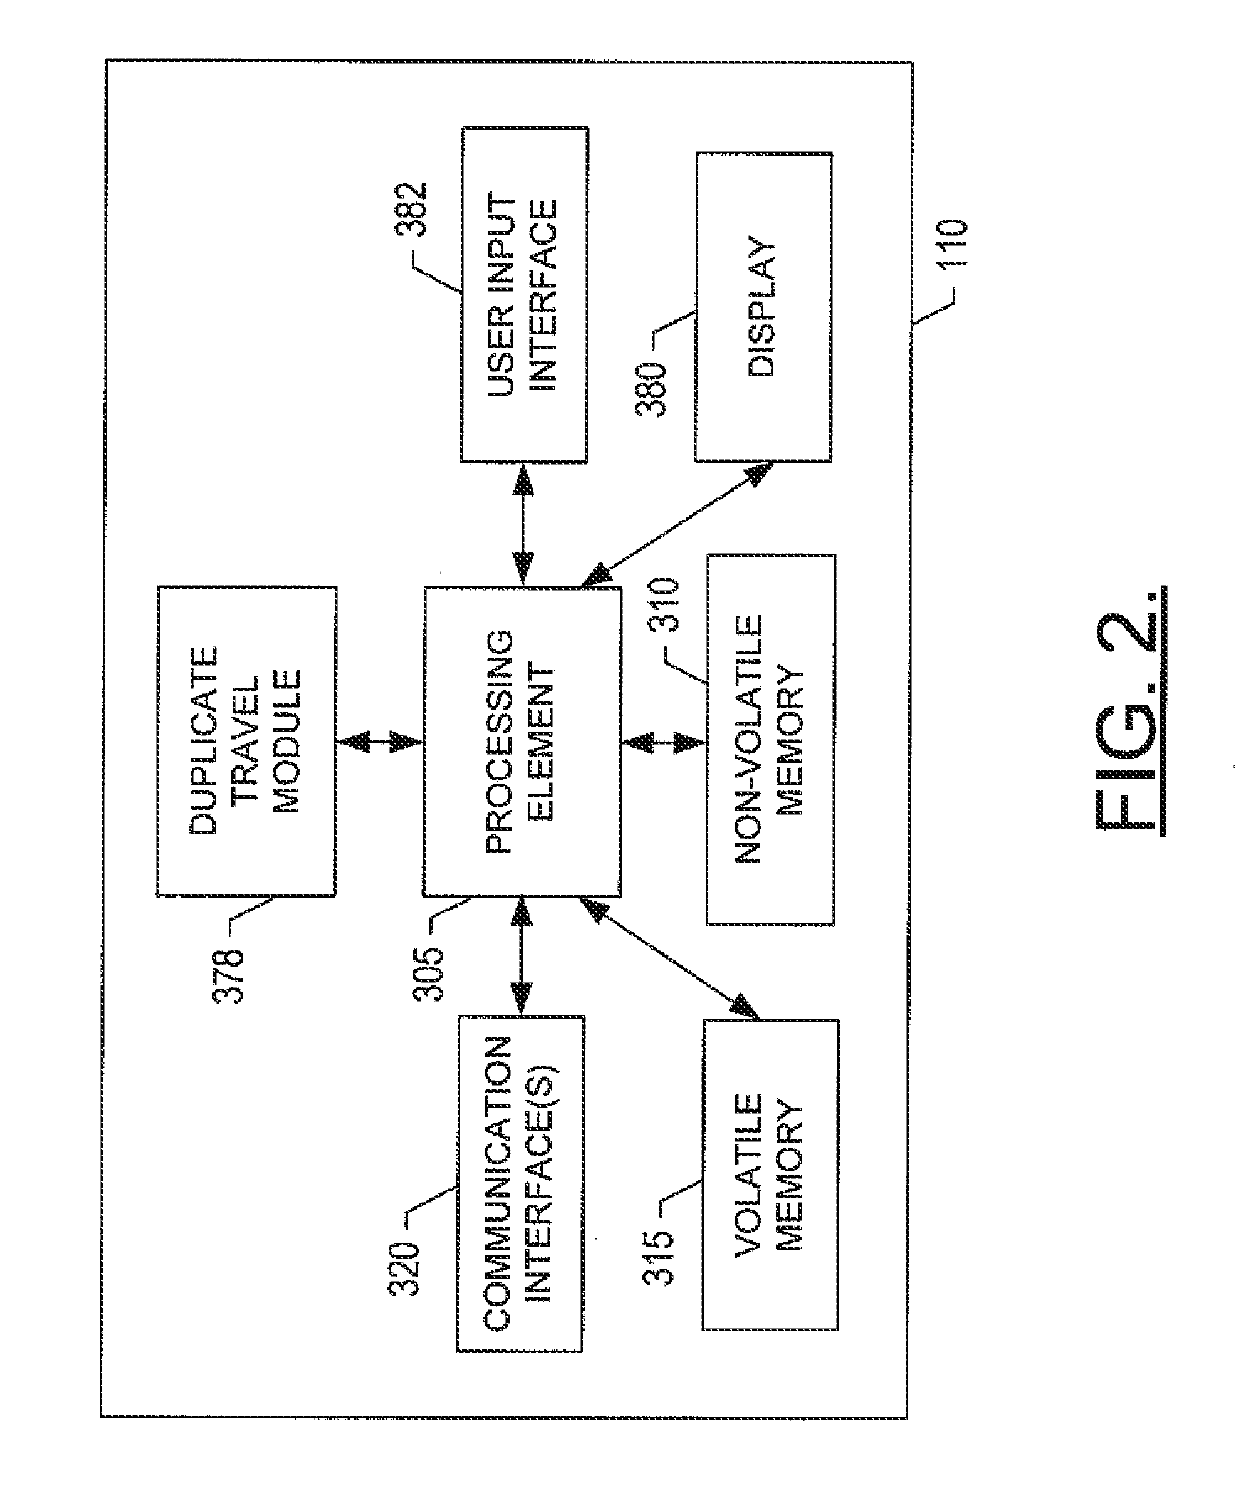 Methods, apparatuses and computer program products for identifying duplicate travel